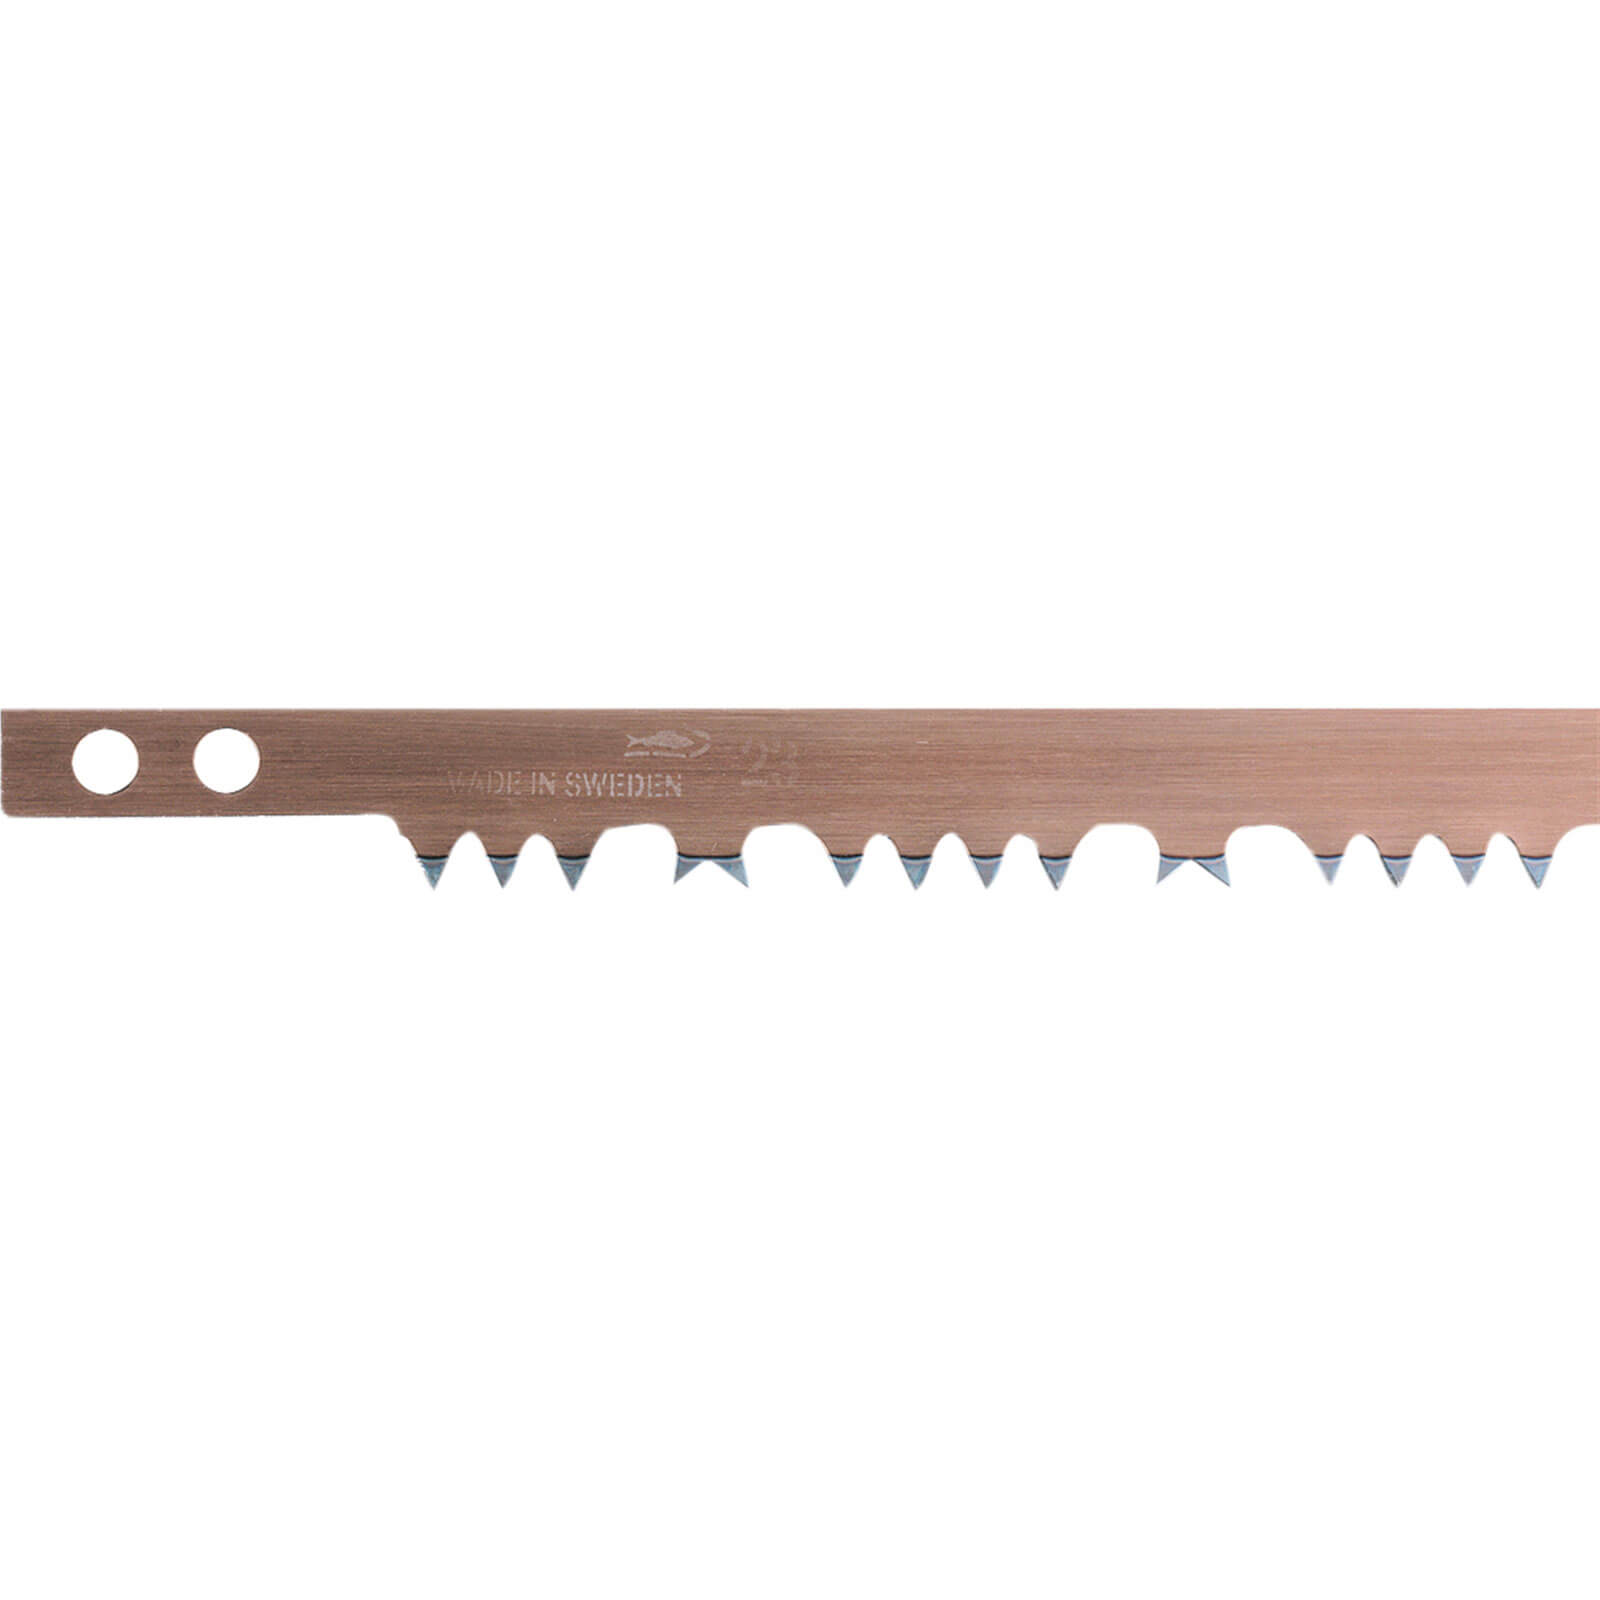 Bahco Raker Tooth Hard Point Bow Saw Blade 21&quot / 530mm For Green Wood